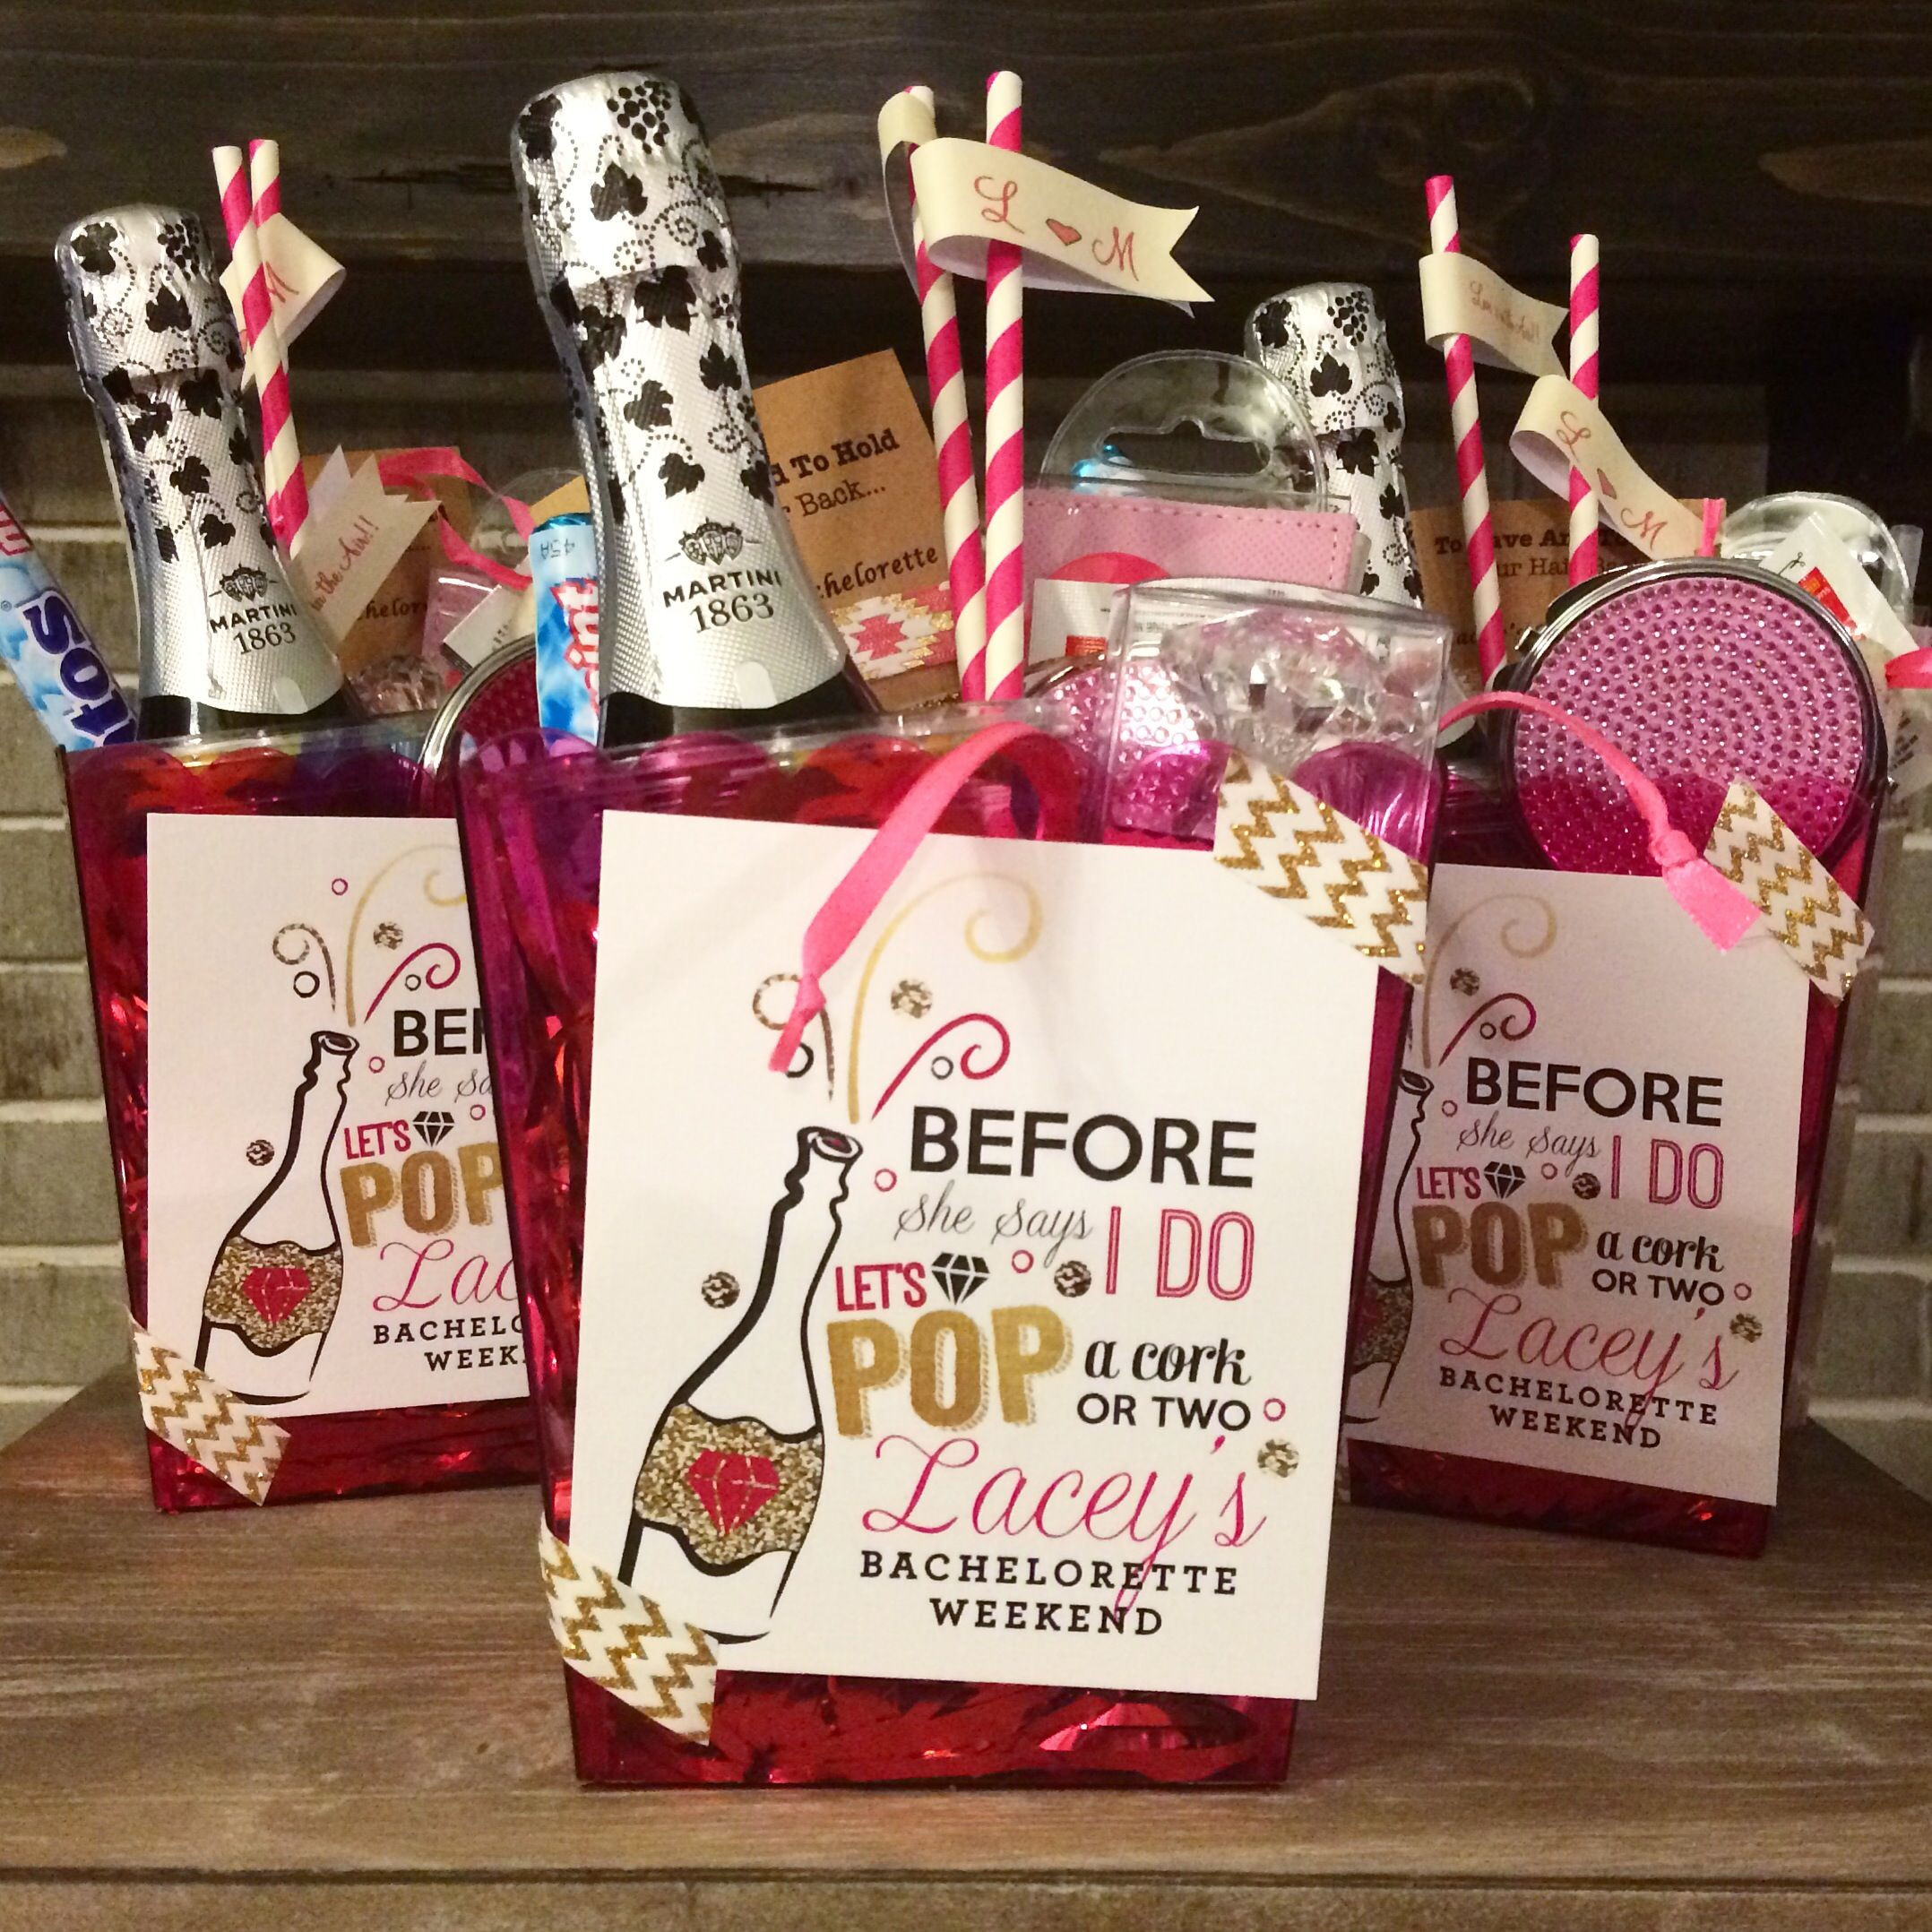 Bachelorette Party Goodie Bag Ideas
 Before she says I do let s pop a cork or two Custom